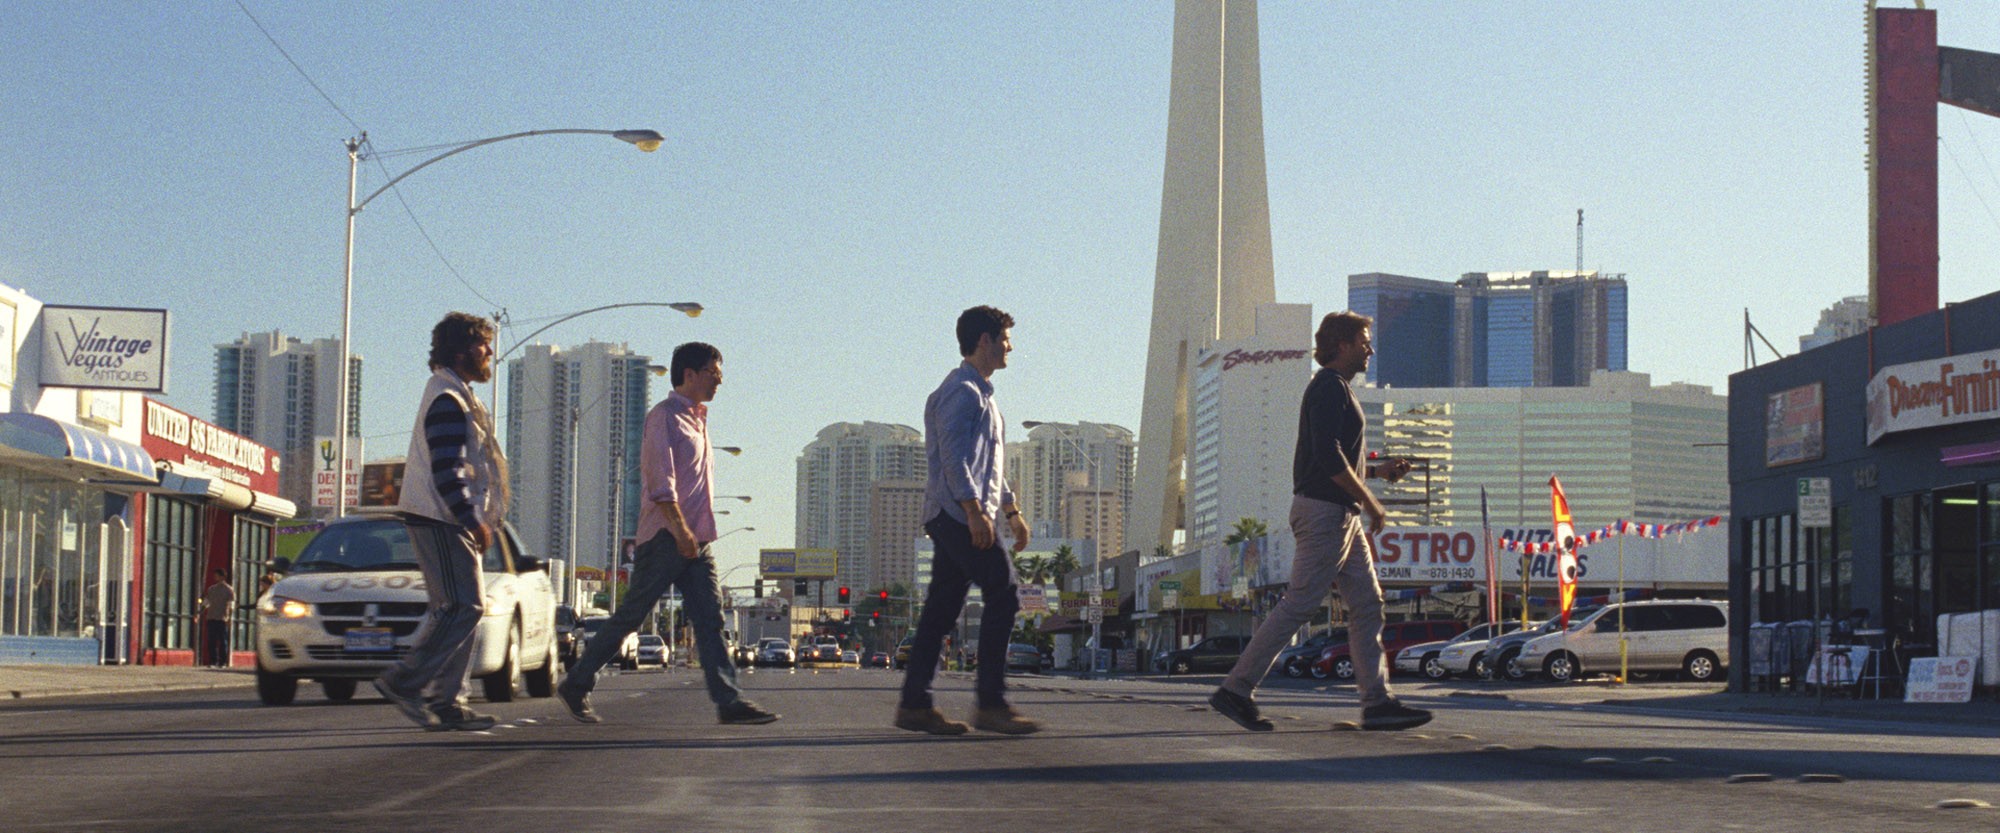 Zach Galifianakis, Ed Helms, Justin Bartha and Bradley Cooper in Warner Bros. Pictures' The Hangover Part III (2013)